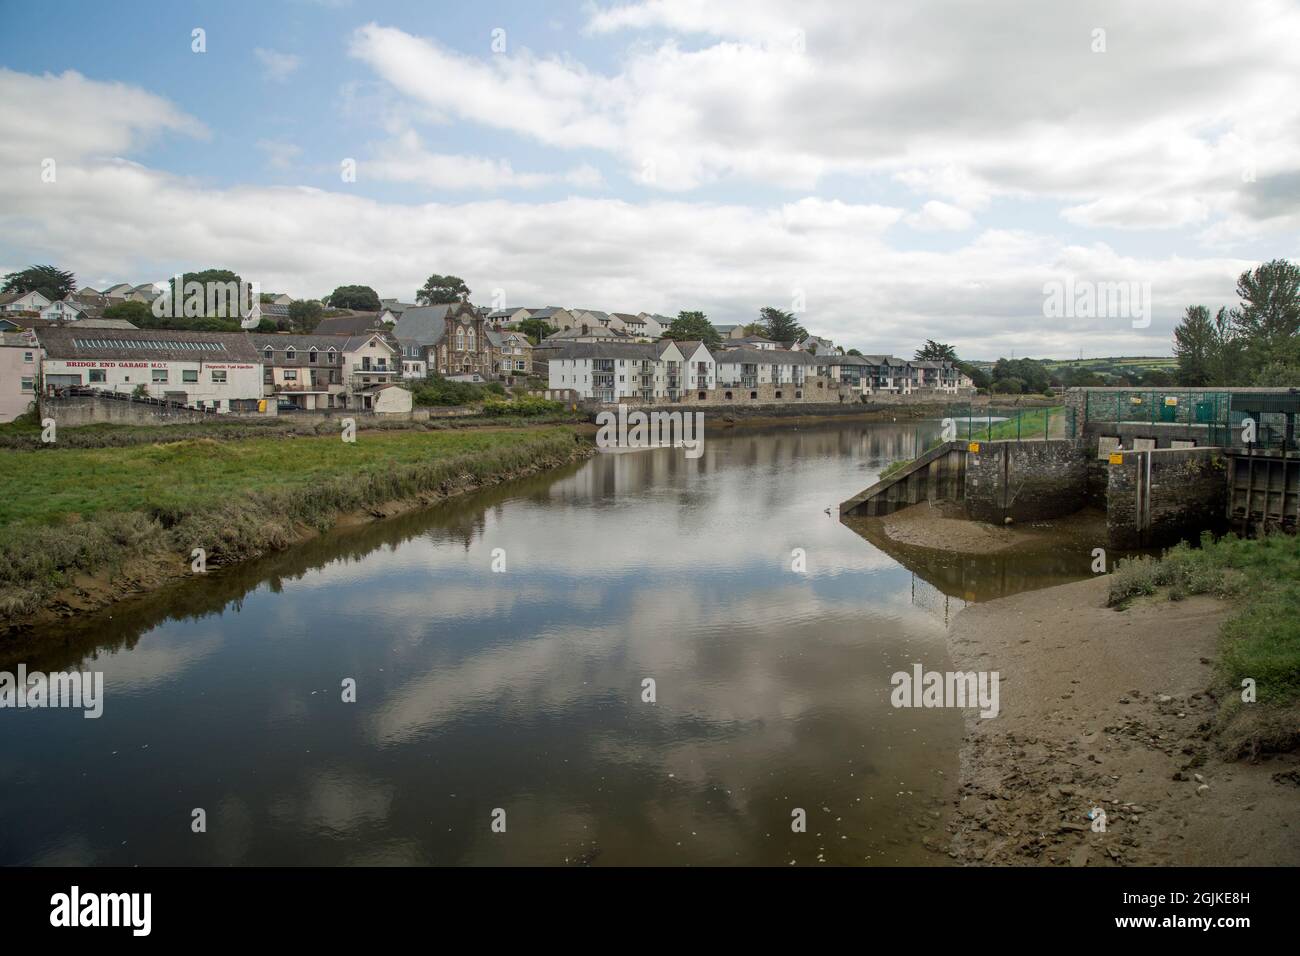 Wadebridge, Cornwall, England, August 30th, 2021, view of the River Camel at Molesworth Street. Stock Photo